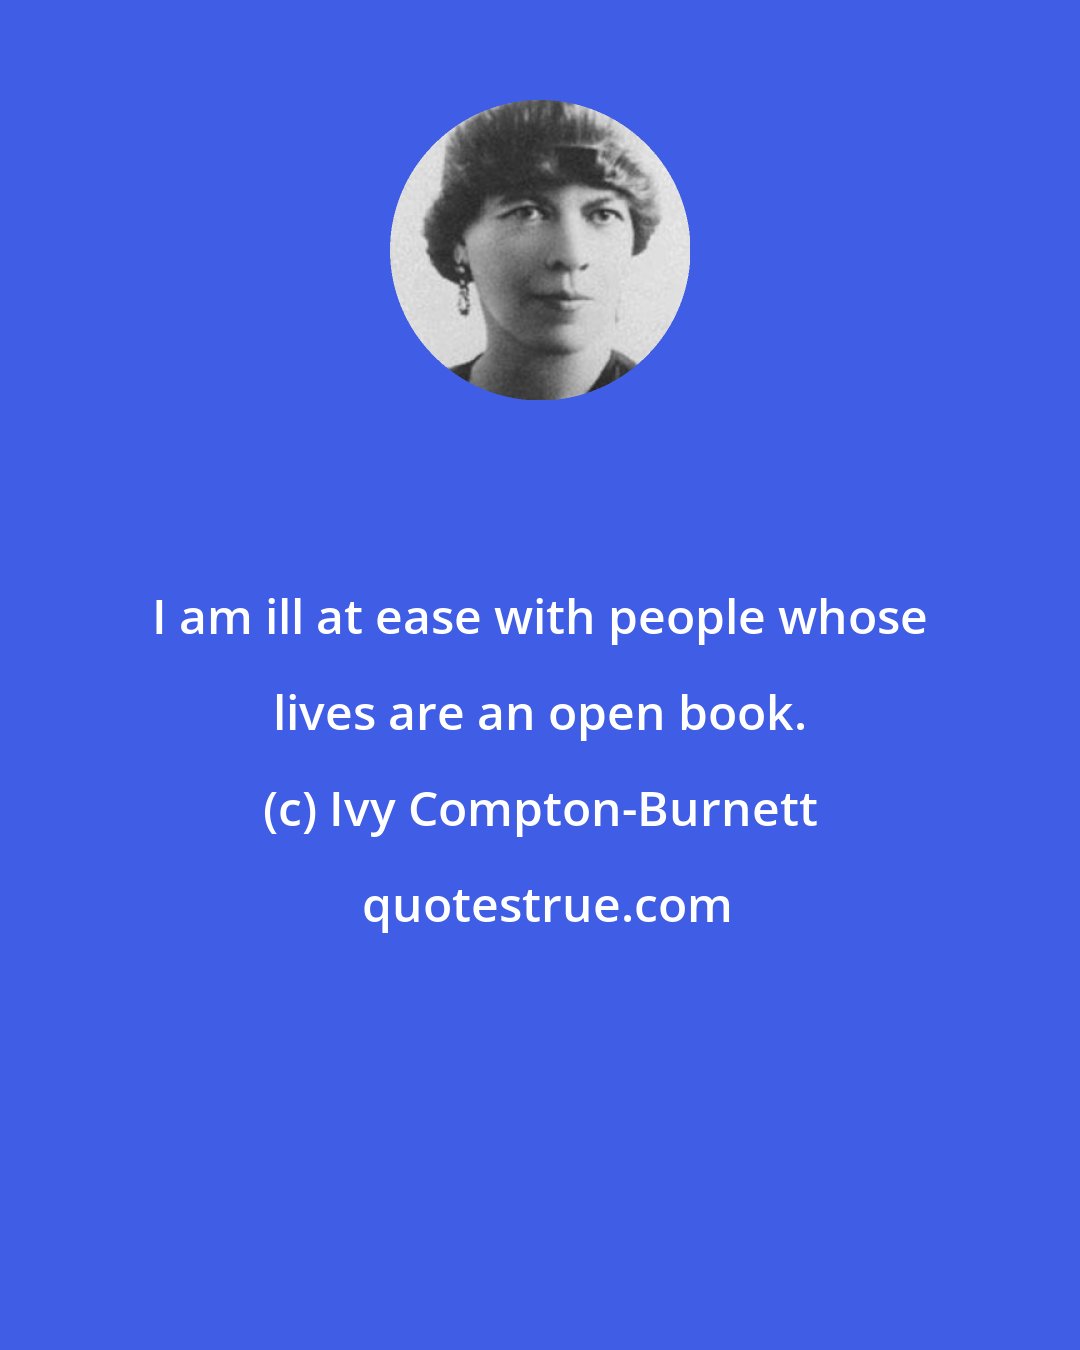 Ivy Compton-Burnett: I am ill at ease with people whose lives are an open book.